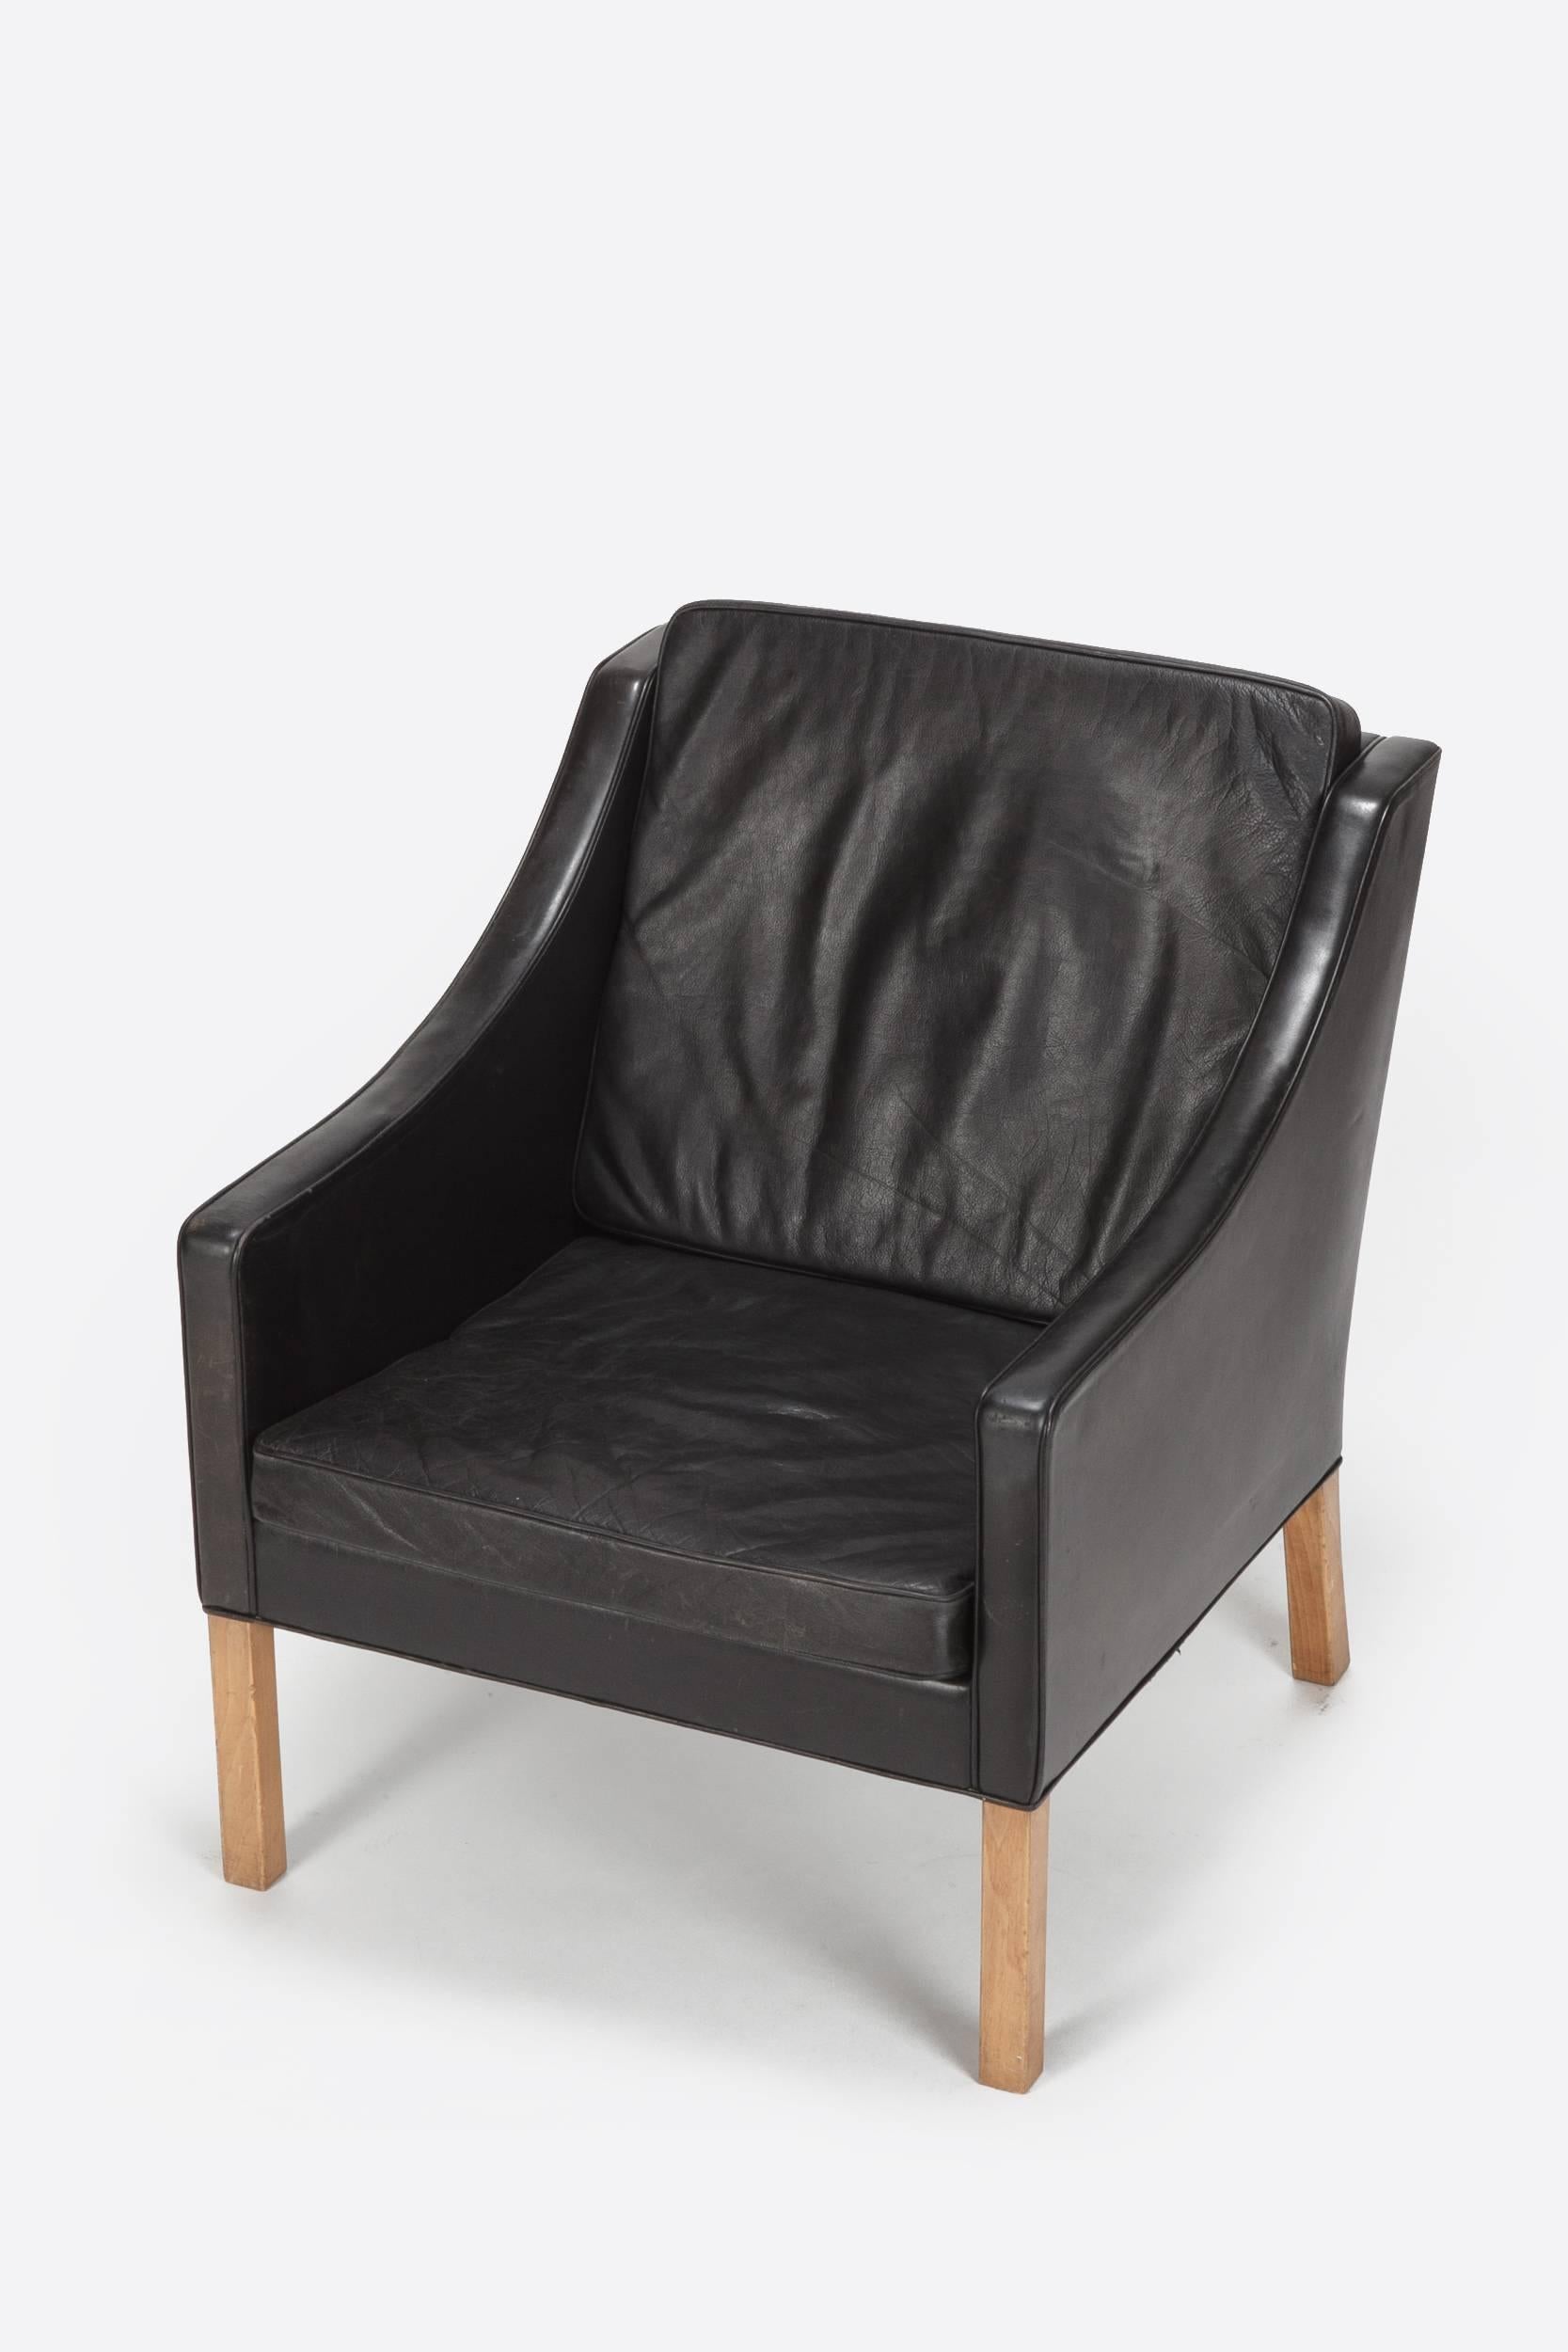 Mid-20th Century Borge Mogensen Lounge Chair 2207 for Fredericia, 1963